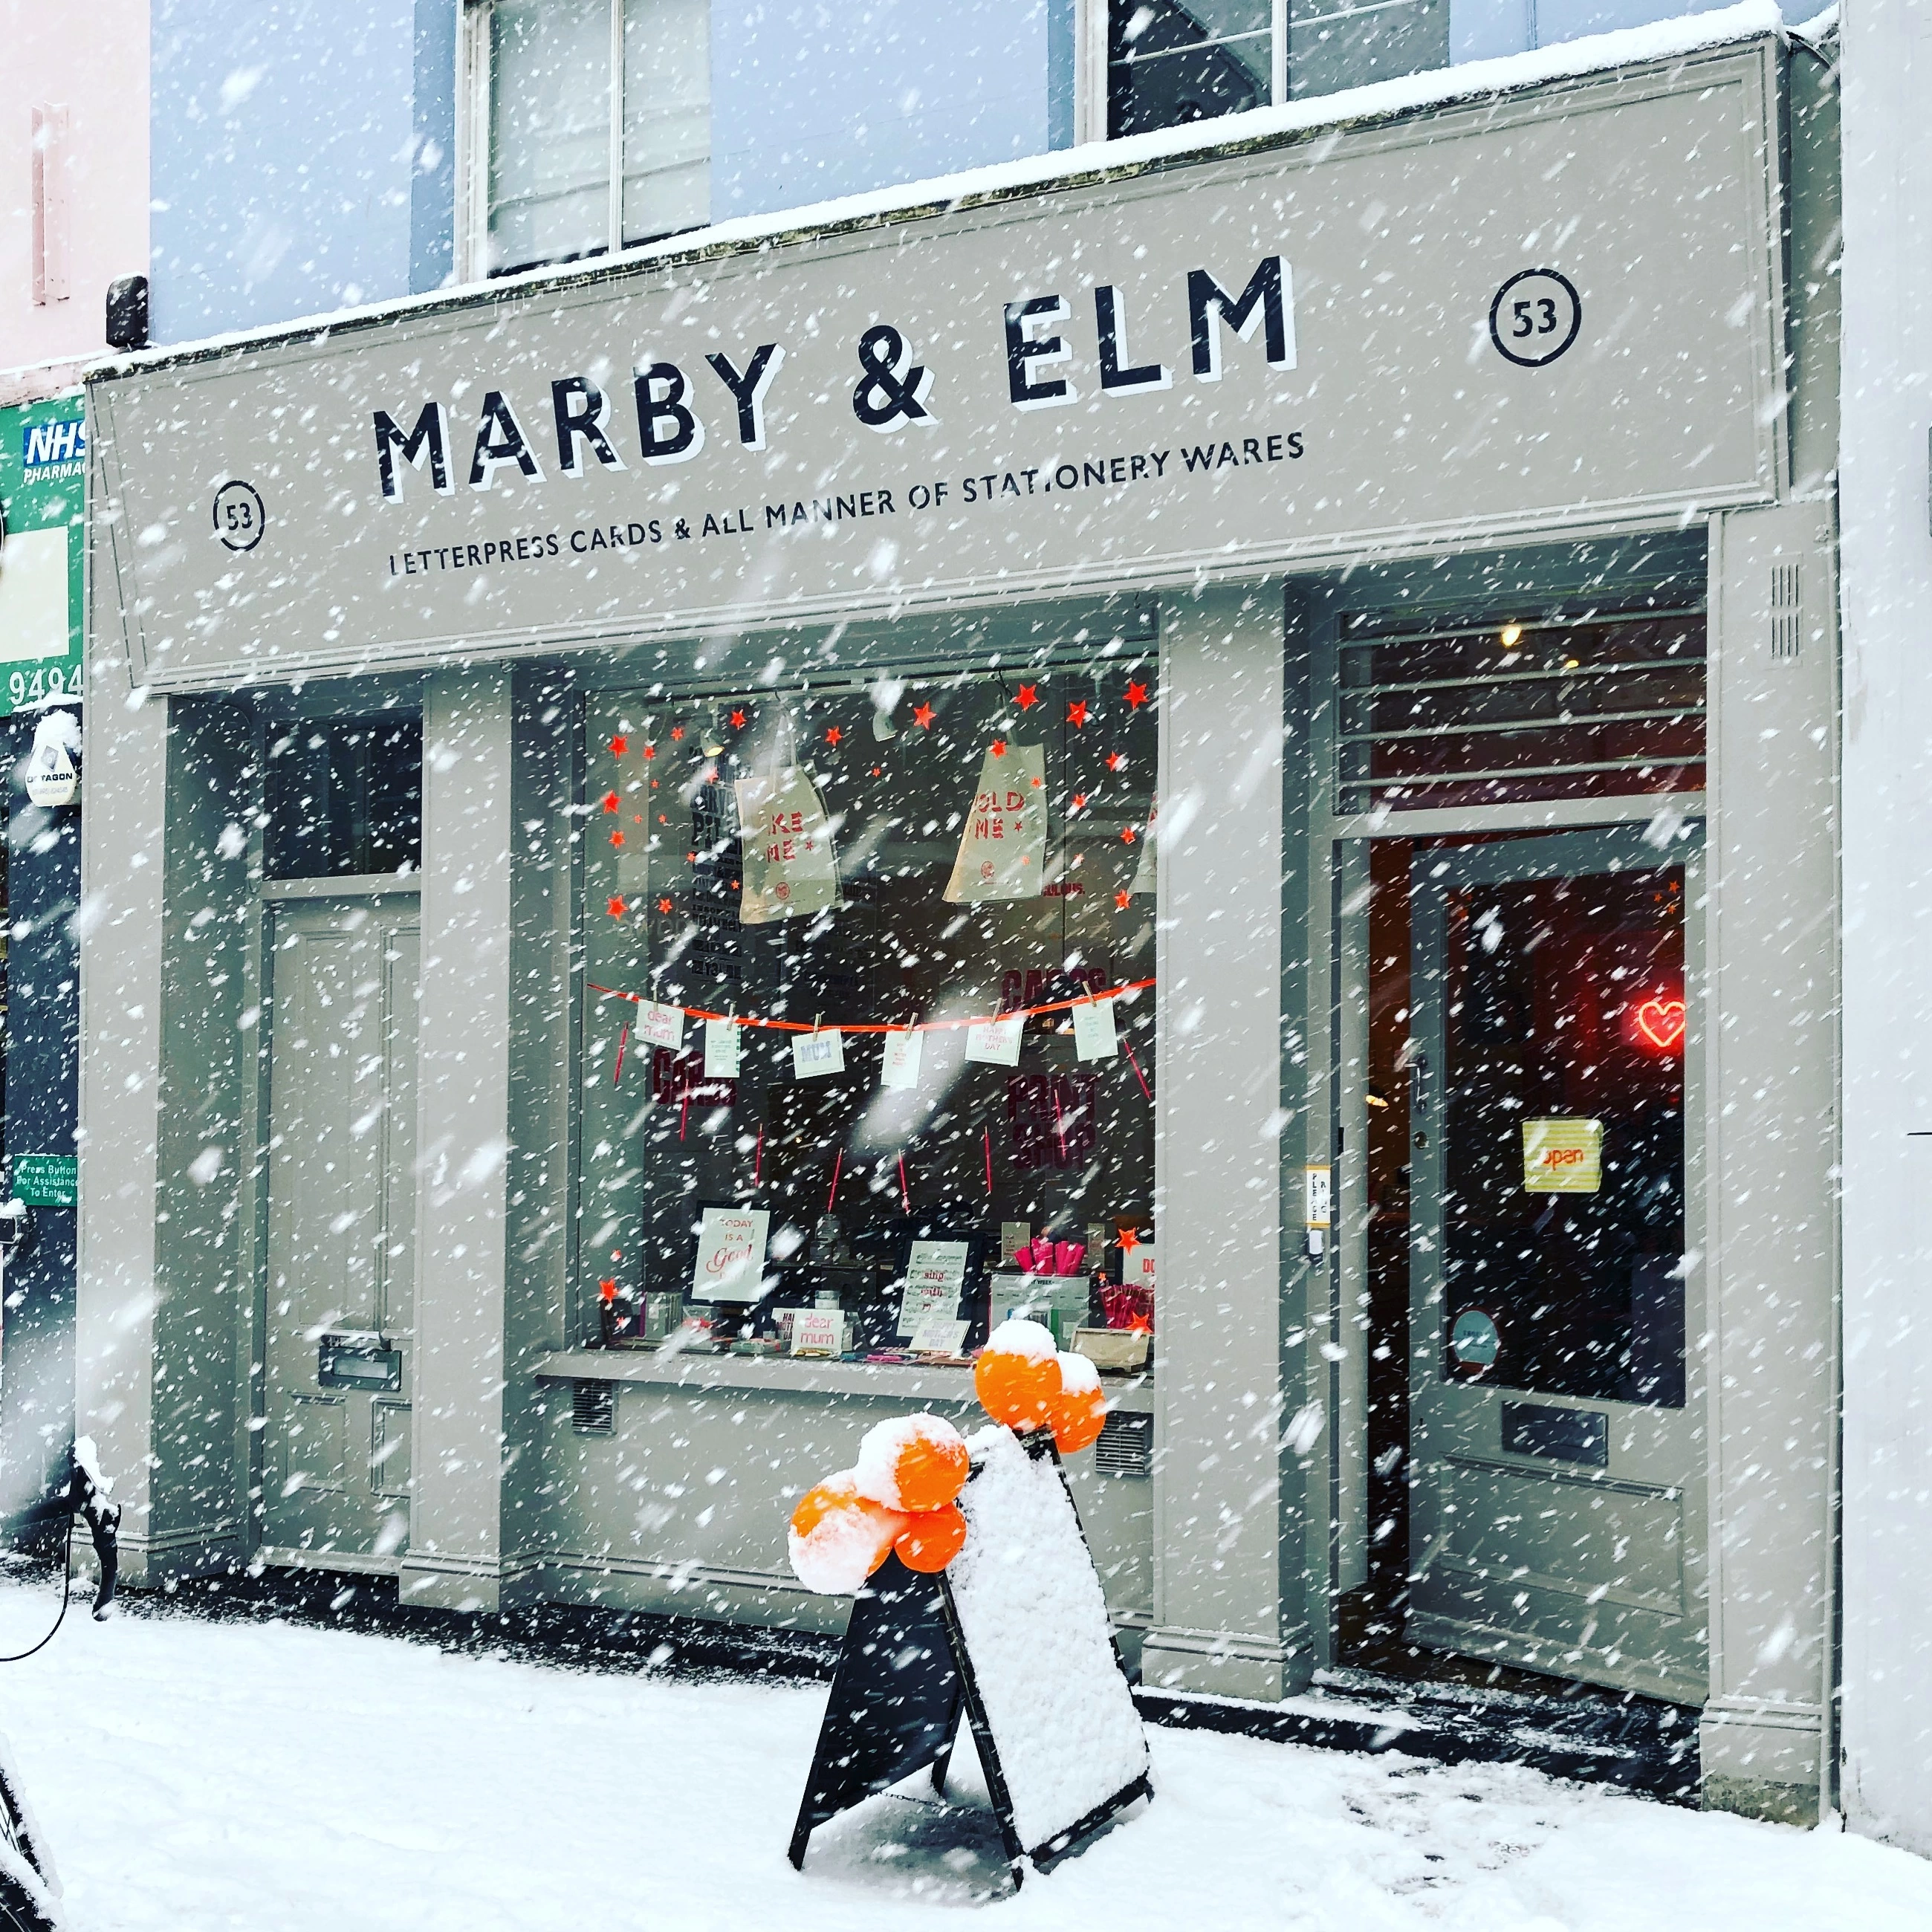 Marby and Elm Shop in the snow